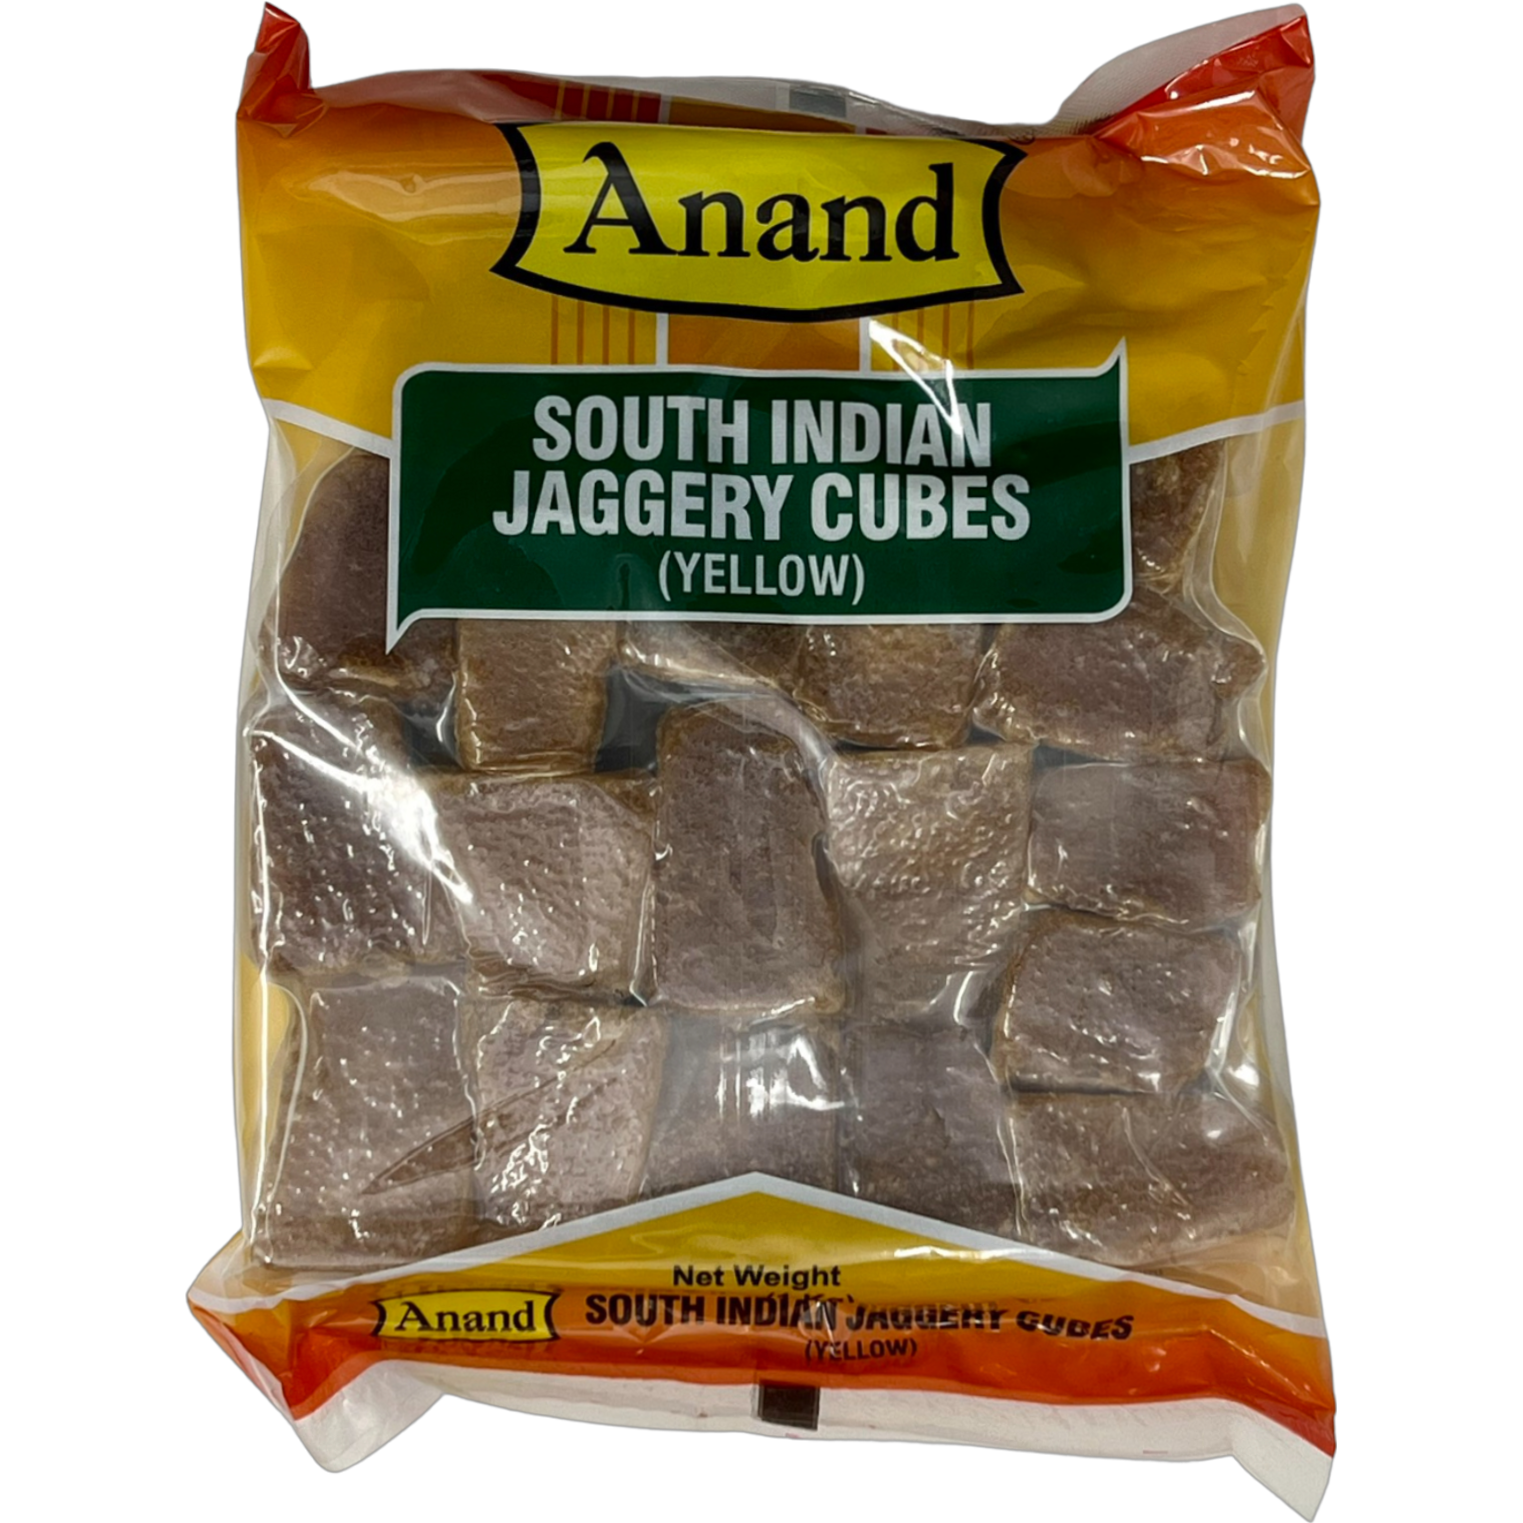 Anand Jaggery Cubes - 1 Kg (2.2 Lb)